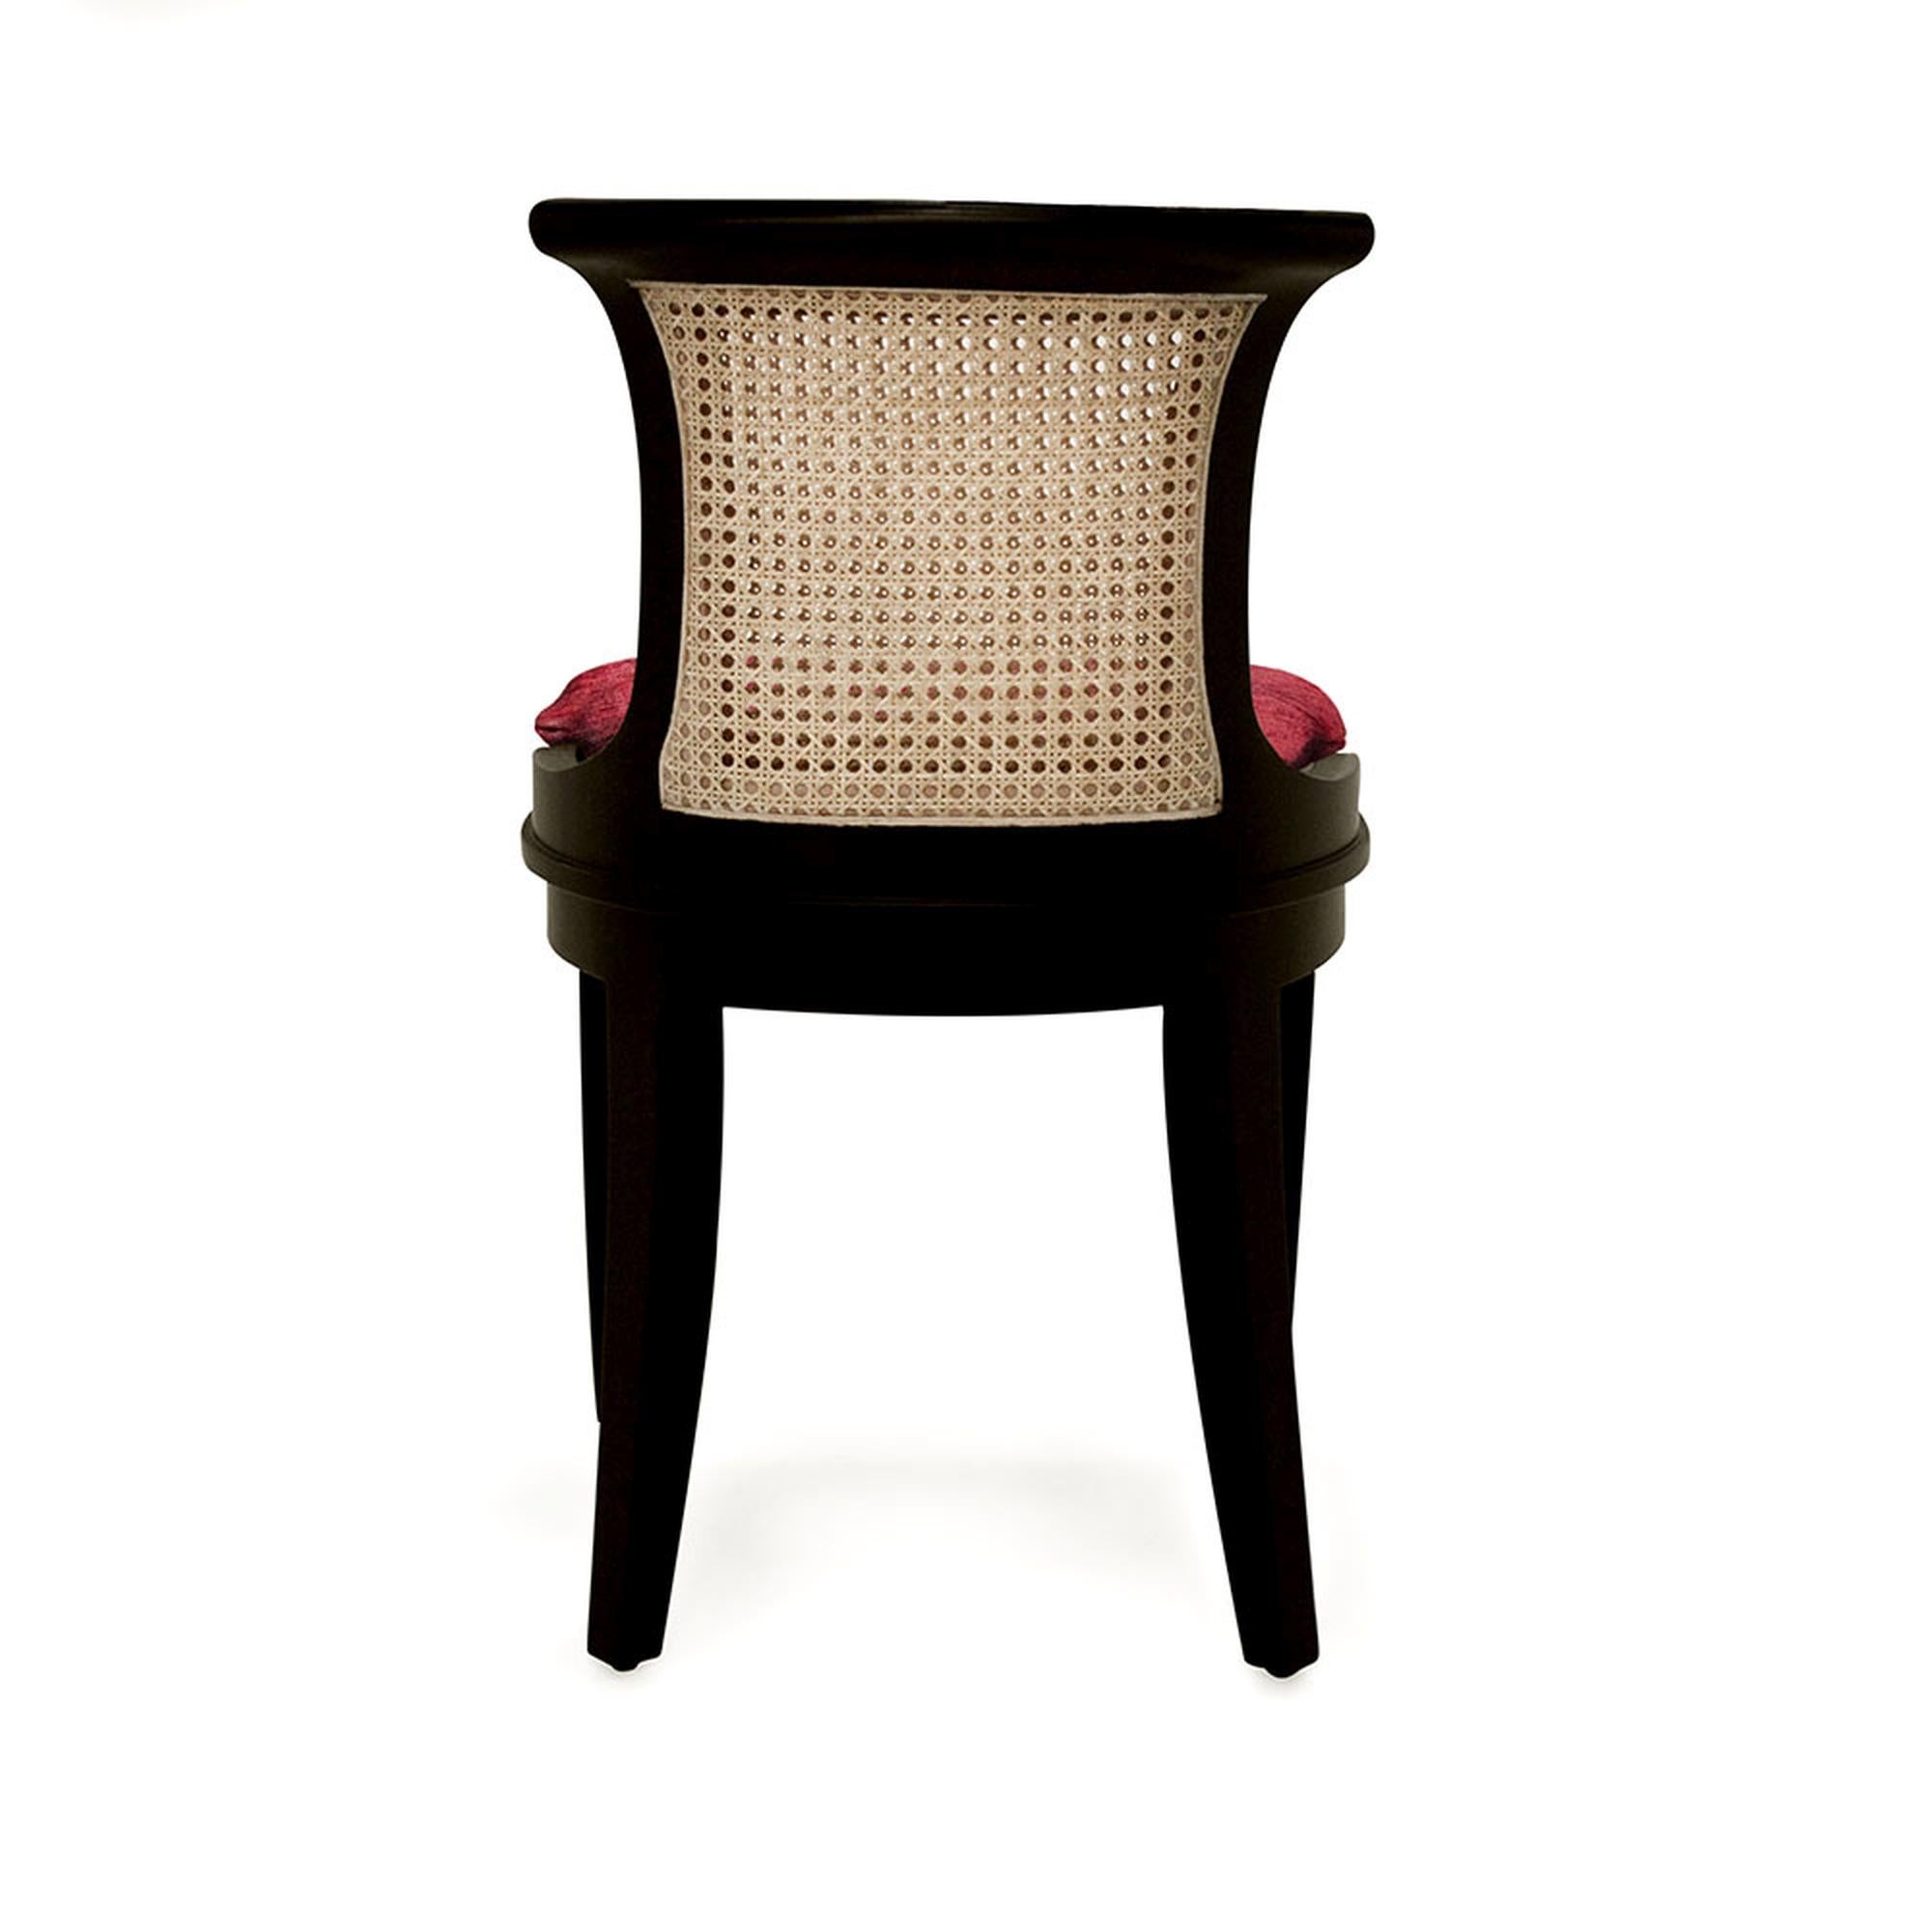 The Marmont game table chair, designed to accompany the Marmont game table, is as relaxed as it is sophisticated. With a featured cane back and down wrapped foam seat cushion, it’s a comfortable place to sit and play for hours. The curved back adds